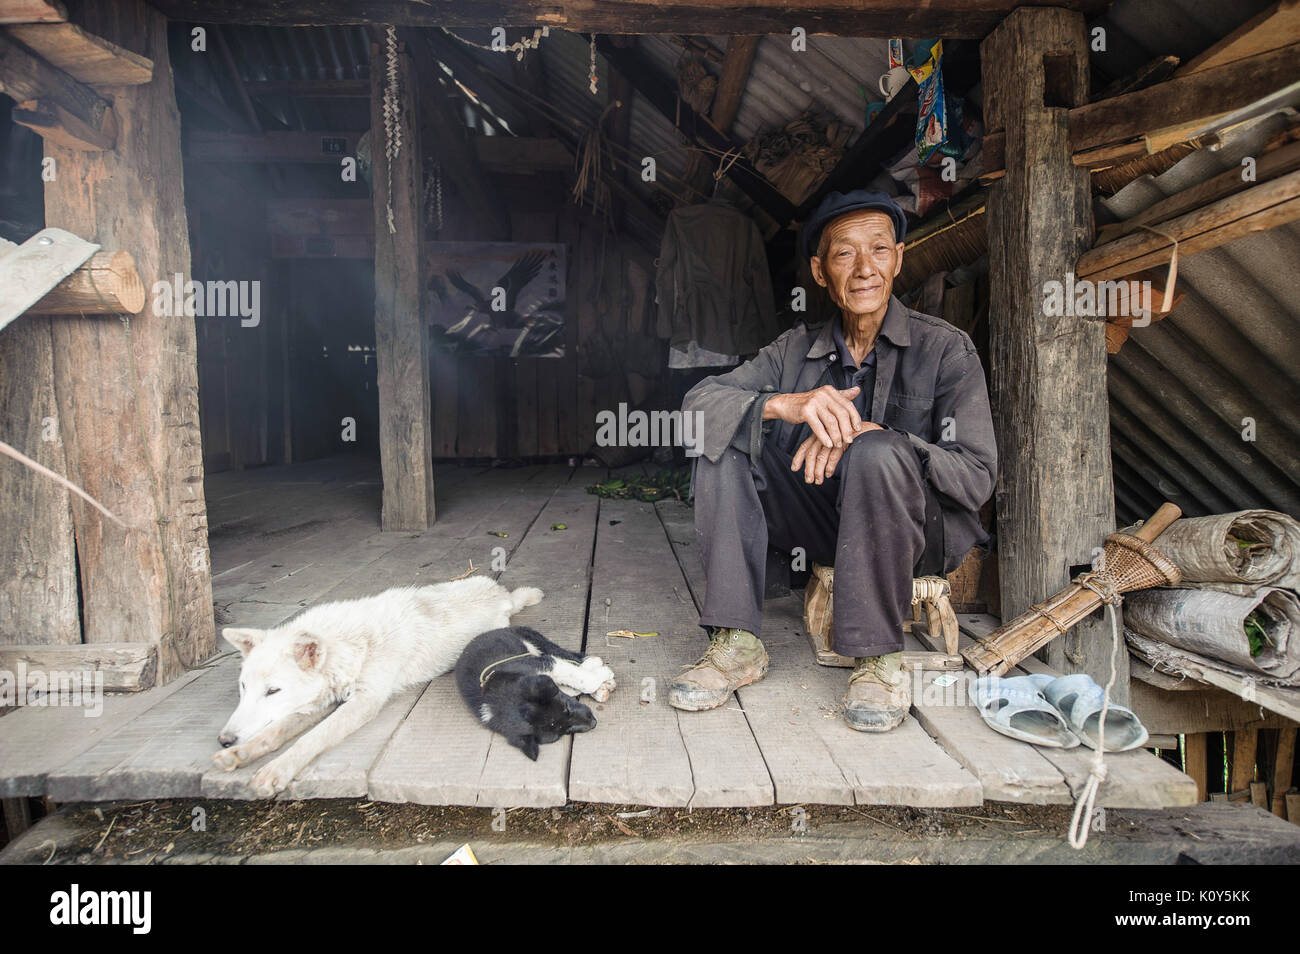 Minoriy ethniques Bulang agriculteur, le Xishuangbanna, Yunnan, Chine Banque D'Images